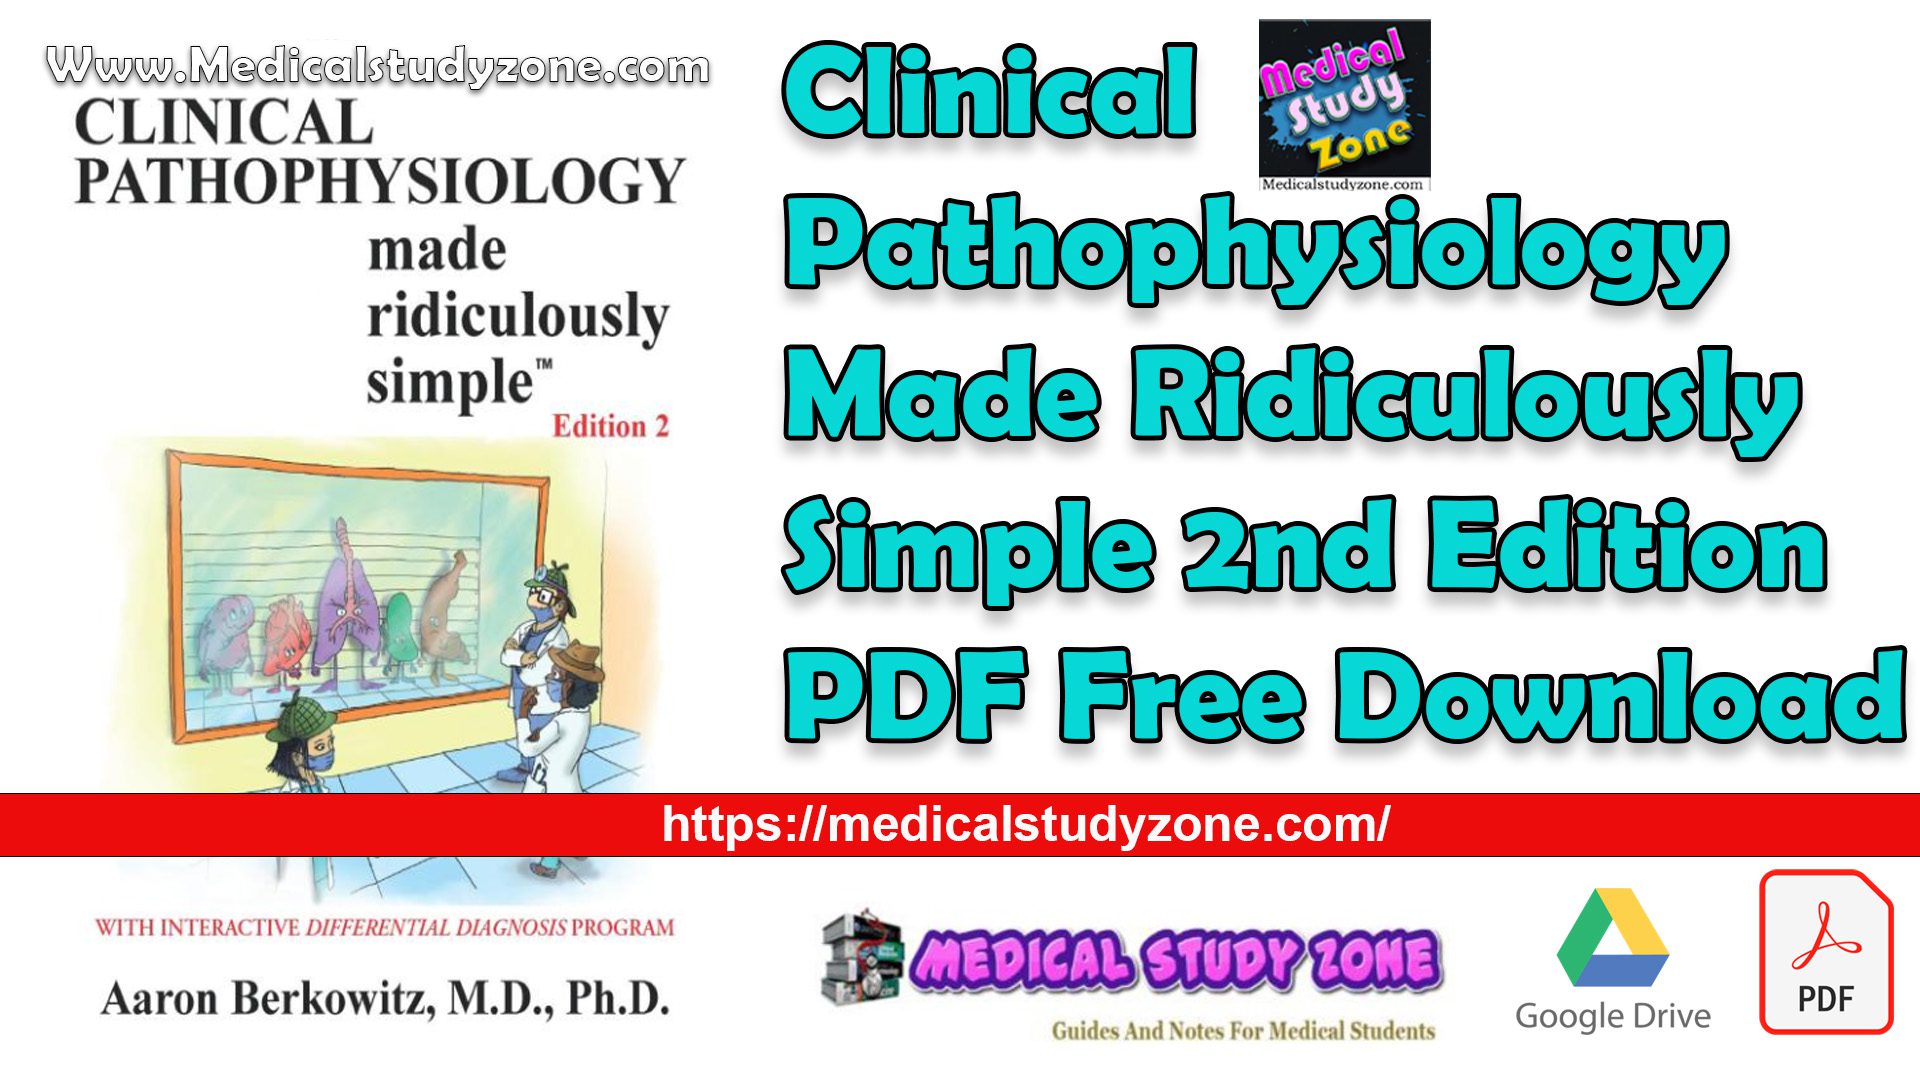 Clinical Pathophysiology Made Ridiculously Simple 2nd Edition PDF Free Download